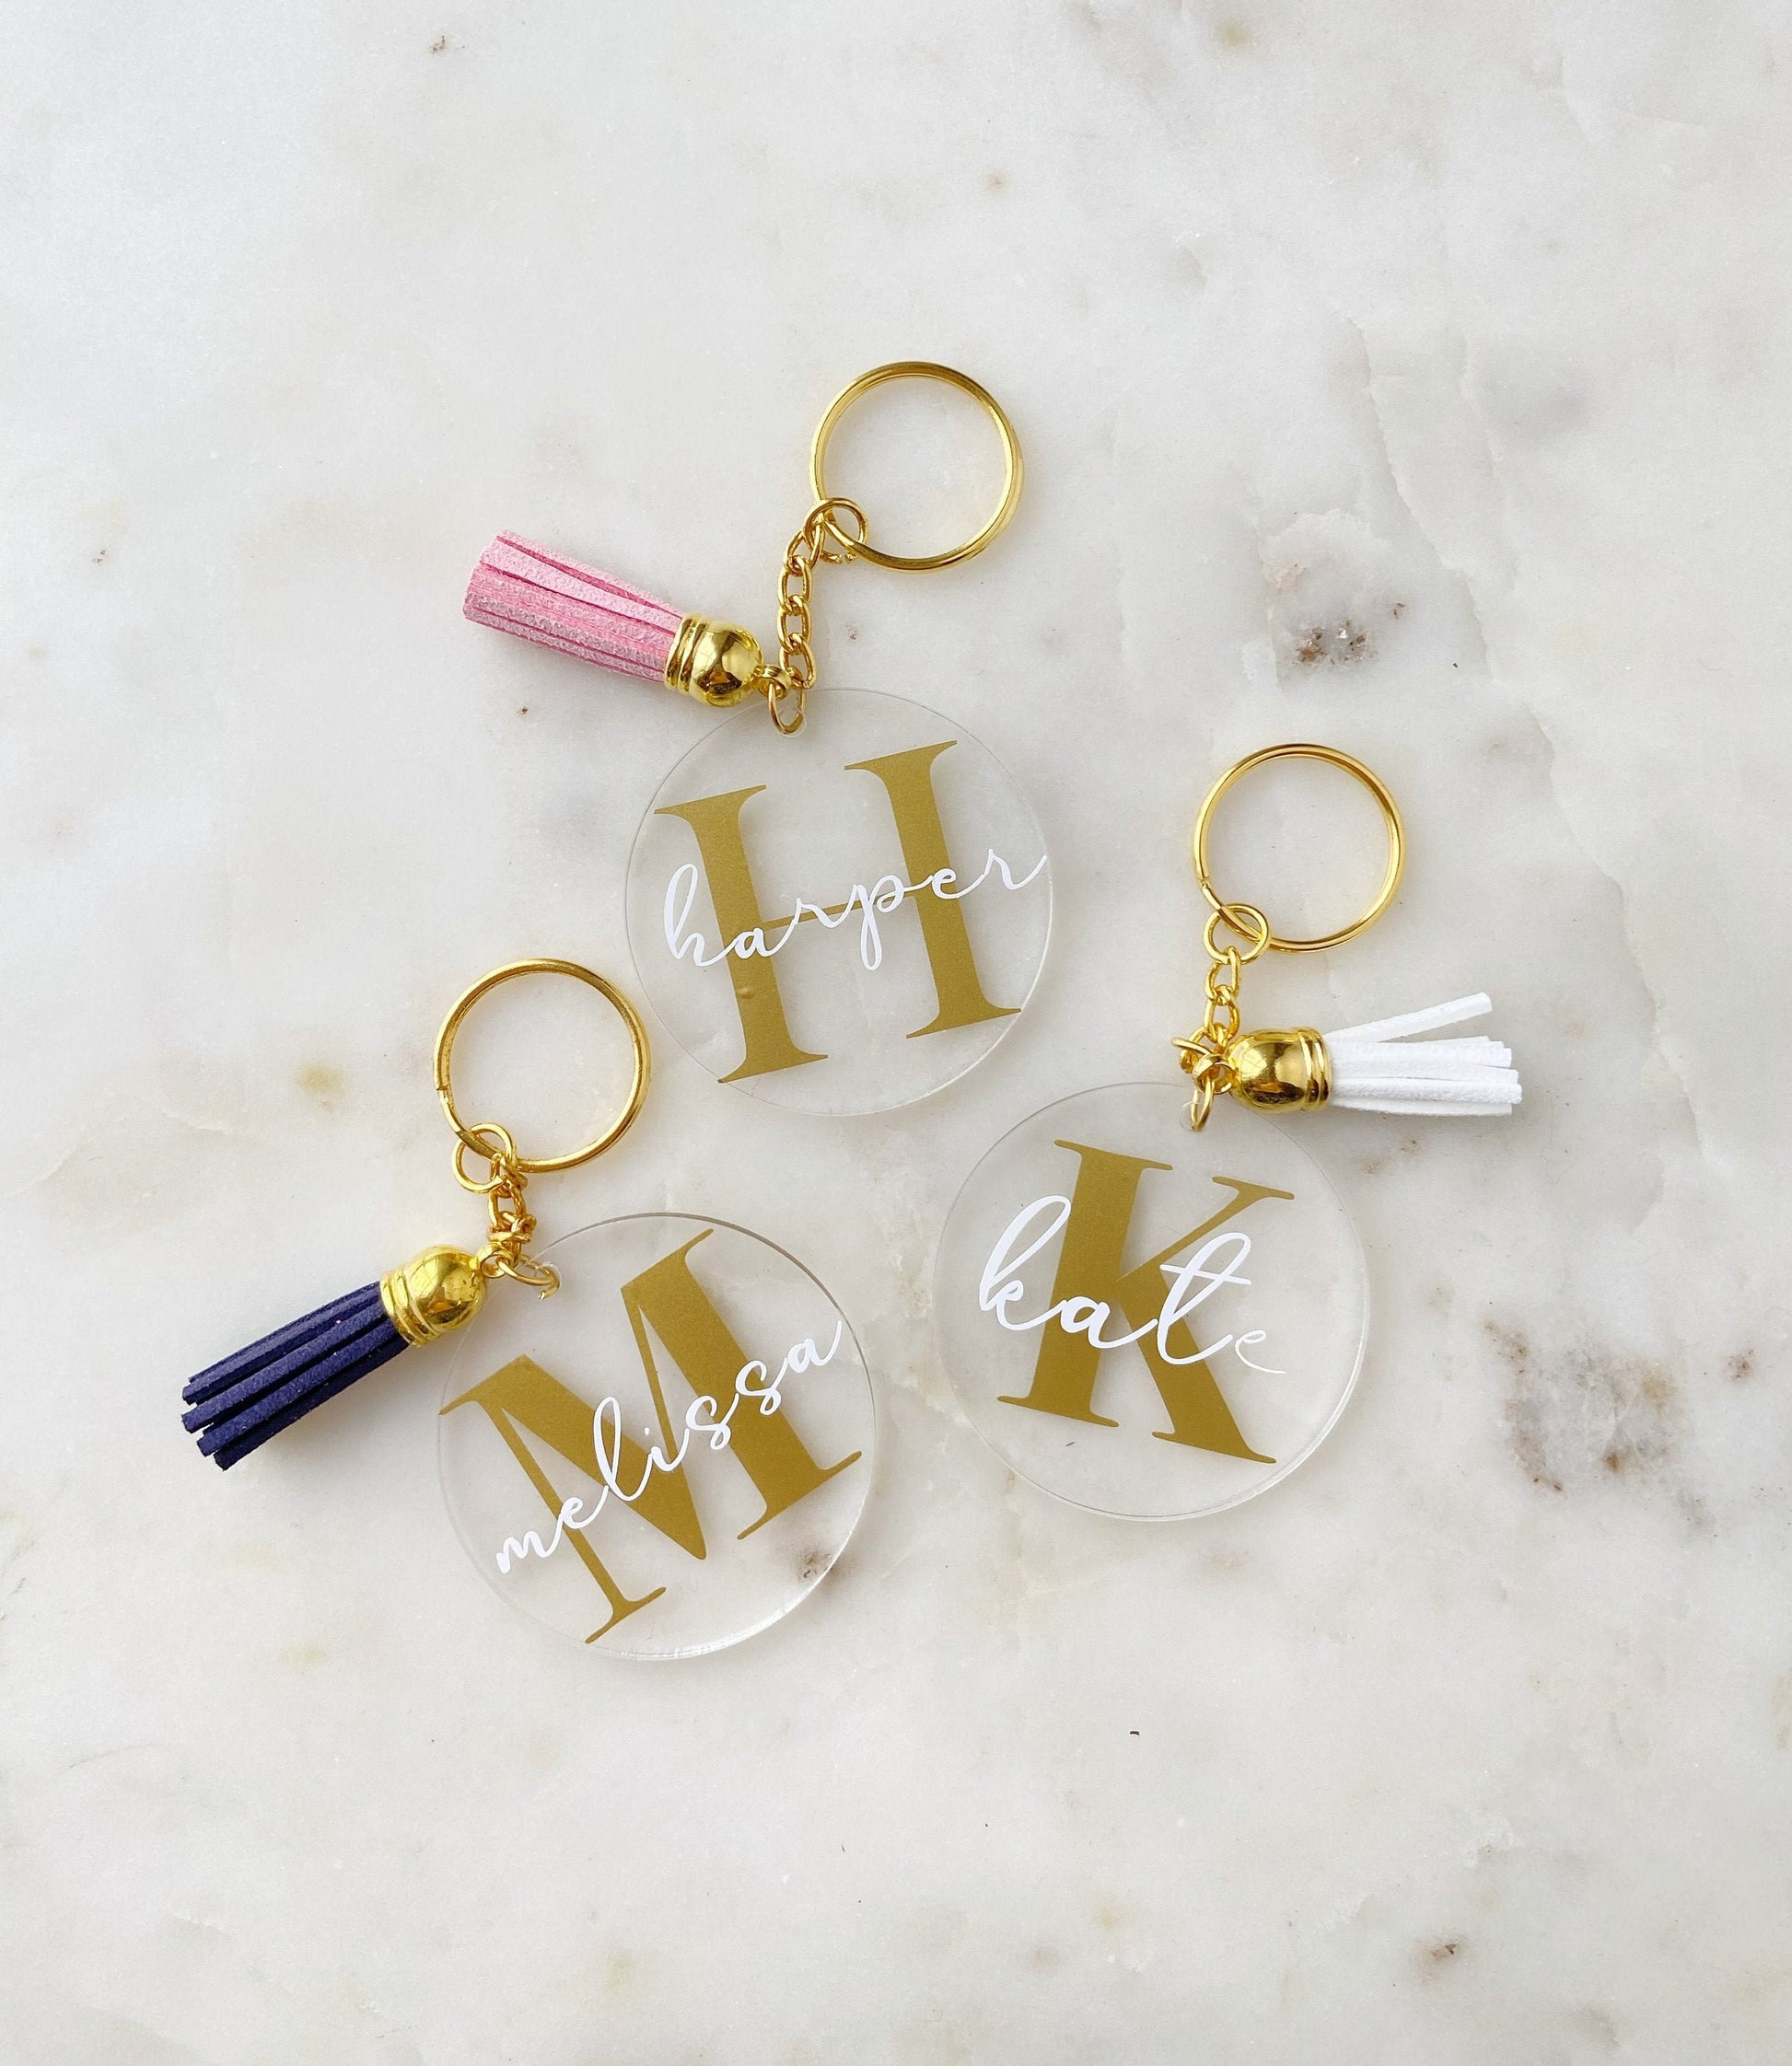 Personalized Initial Keychain by oNecklace